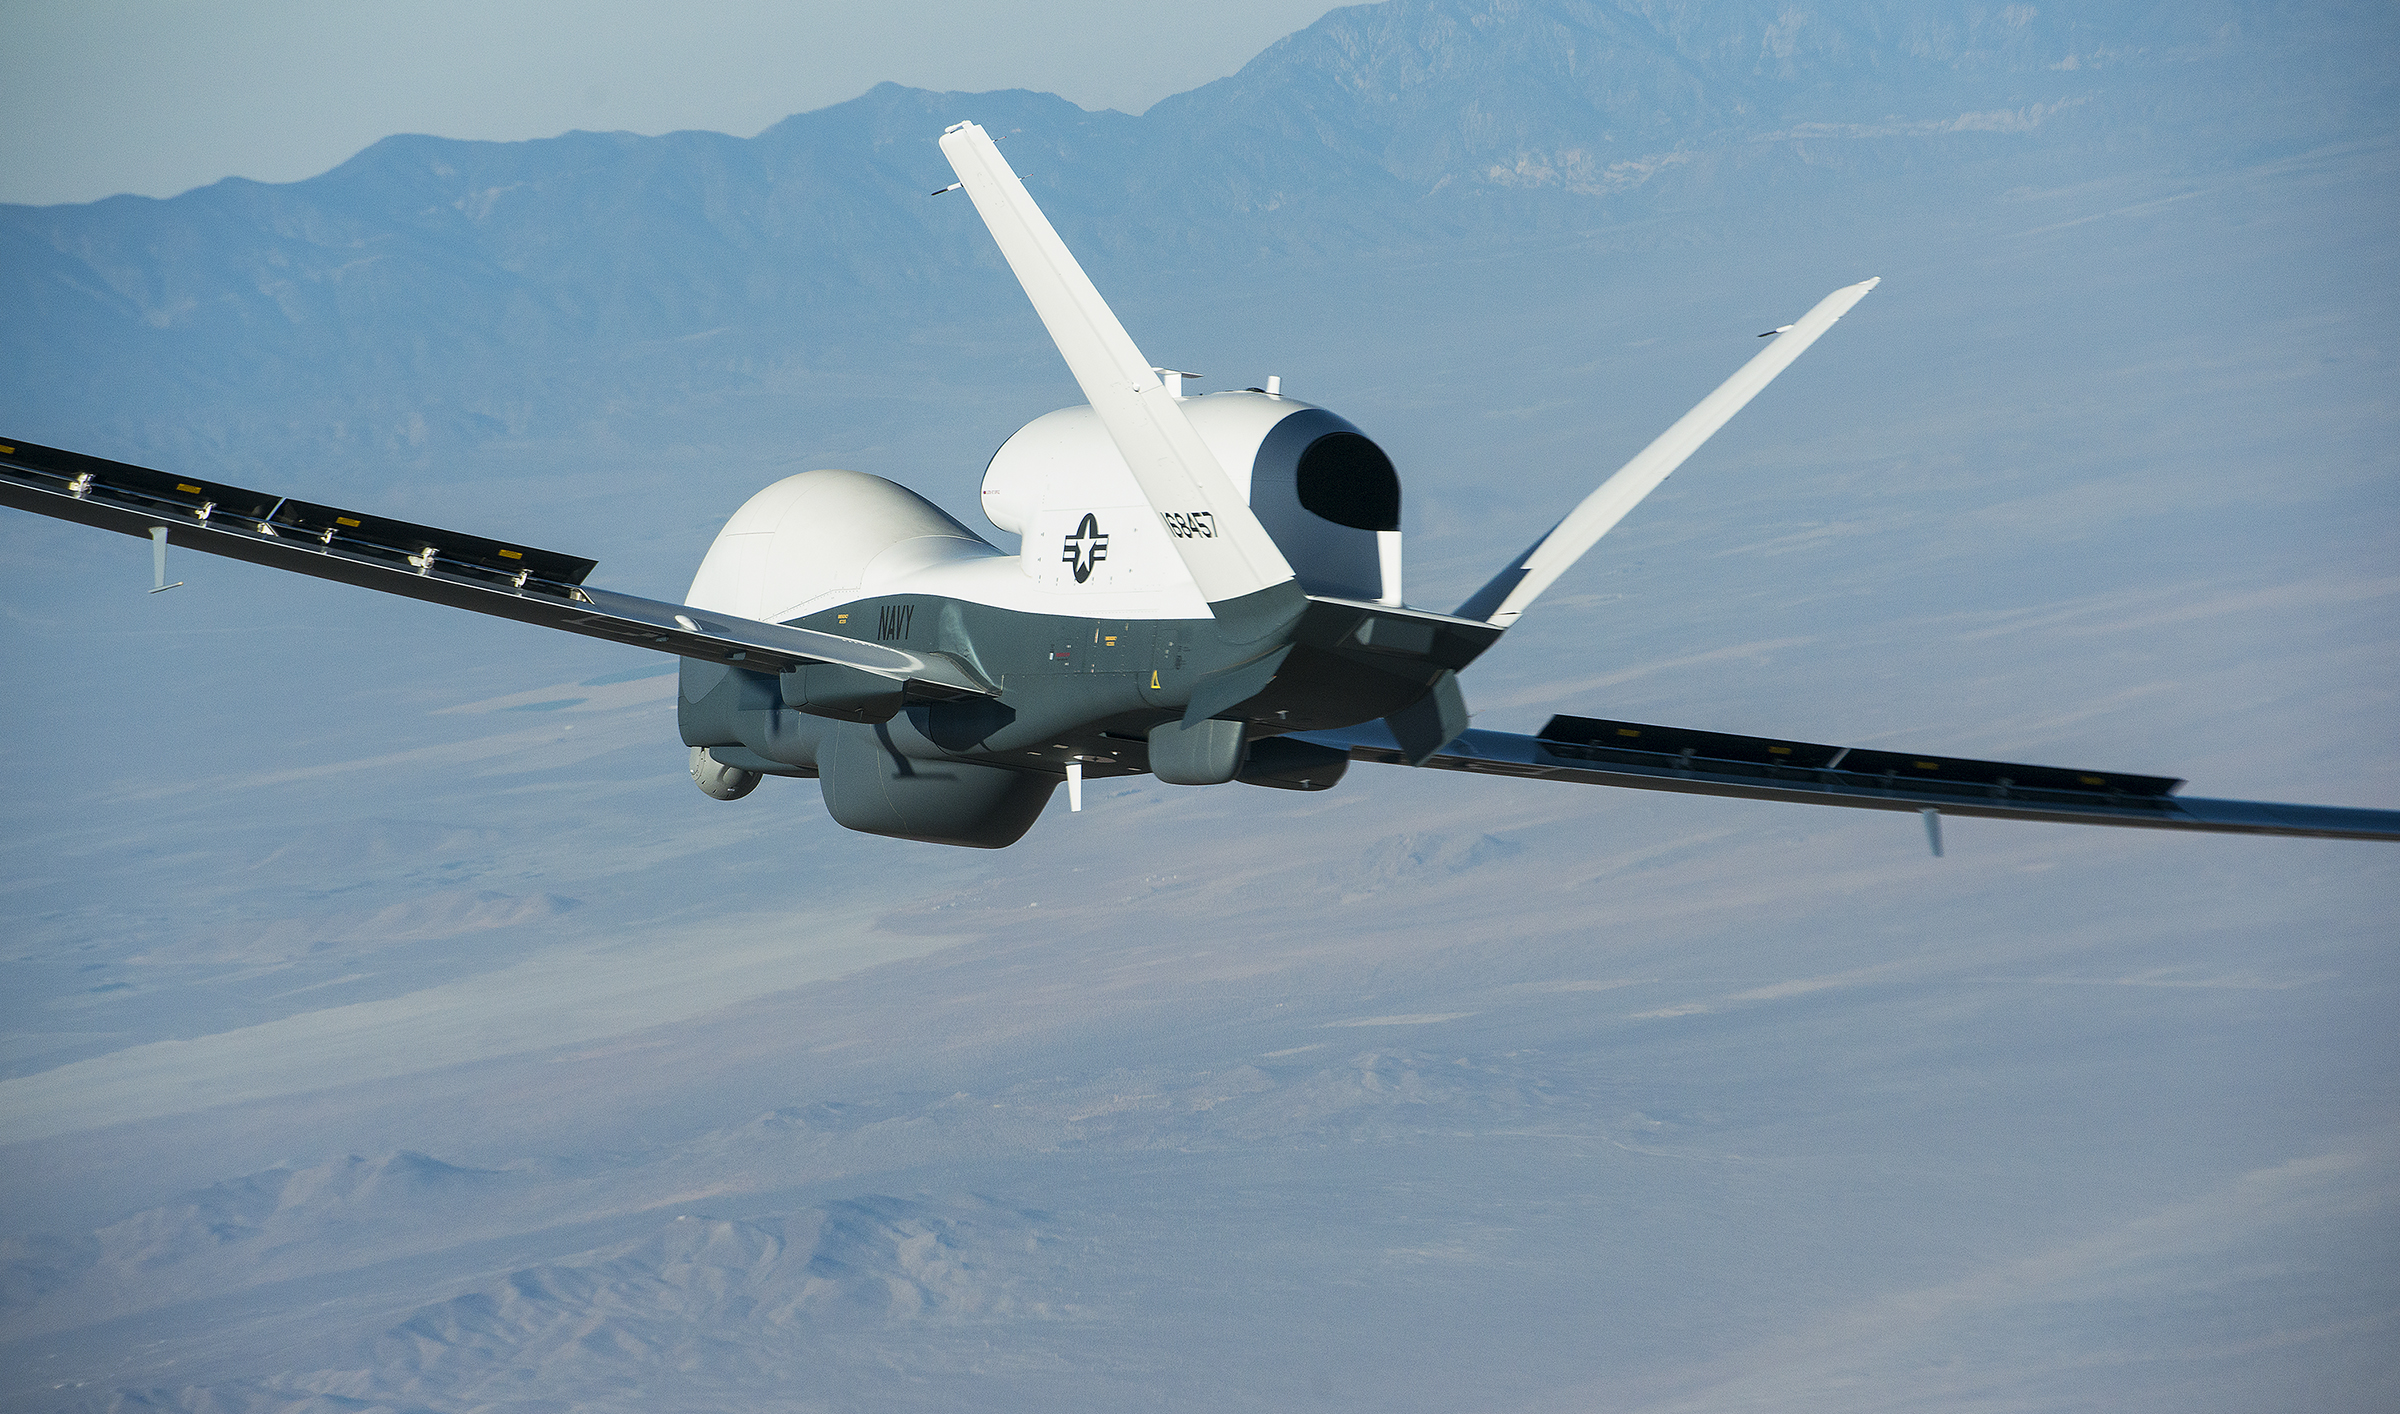 Northrop Grumman-built Triton unmanned aircraft system completed its first flight May 22, 2013, from the company's manufacturing facility in Palmdale, Calif. Northrop Grumman Photo